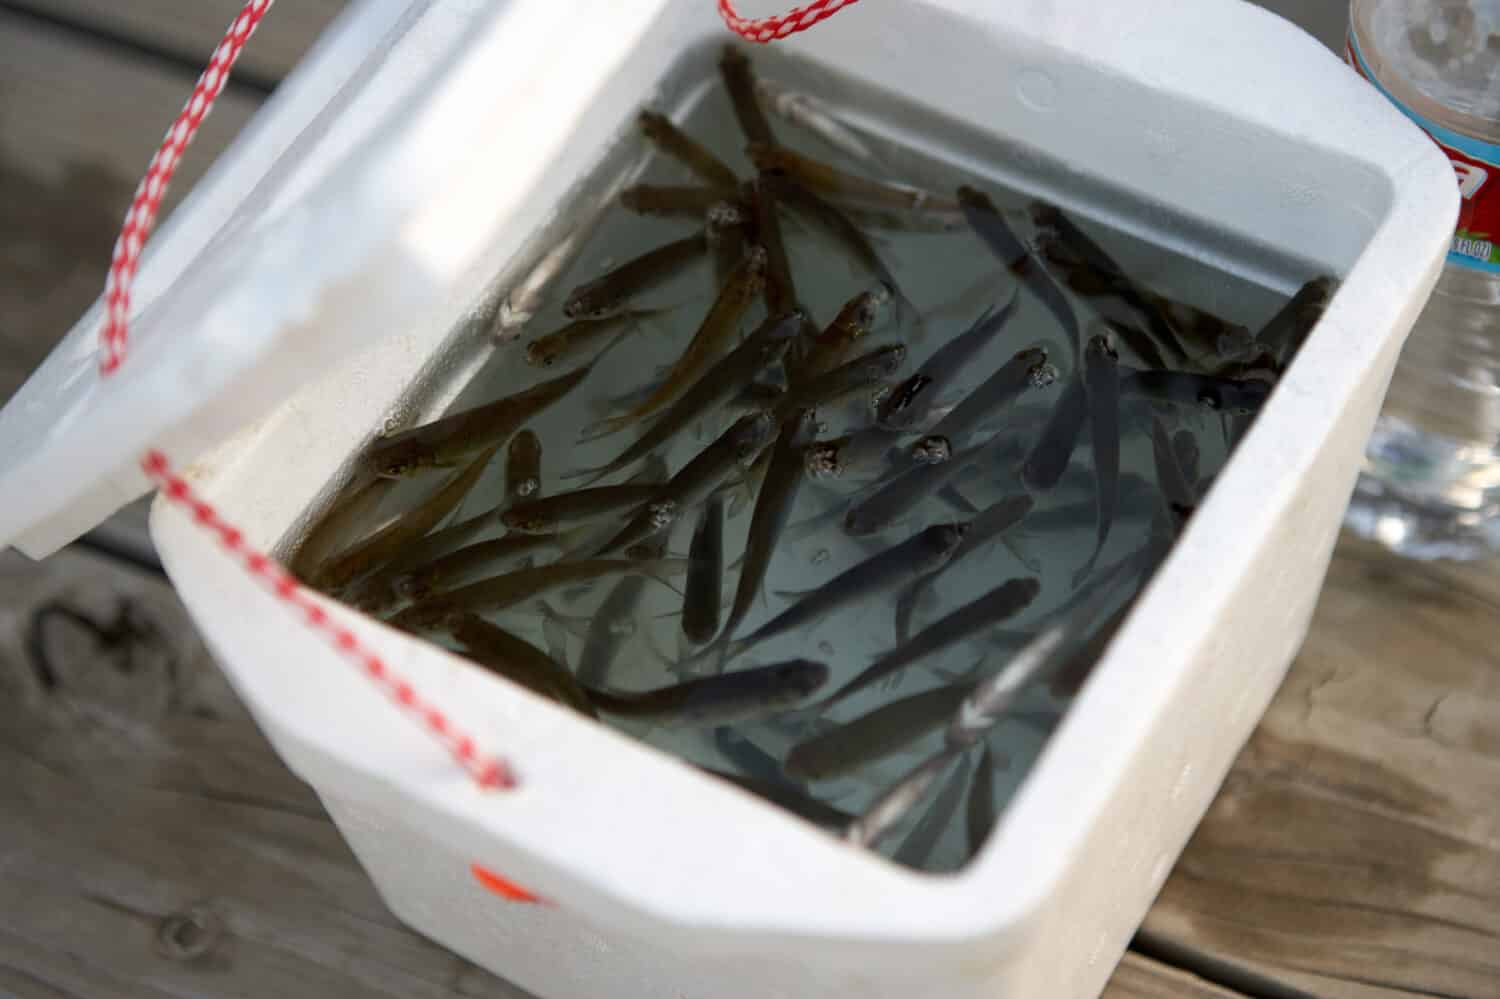 Small minnows swimming in a polystyrene box on wooden planking ready to use as bait for freshwater fishing